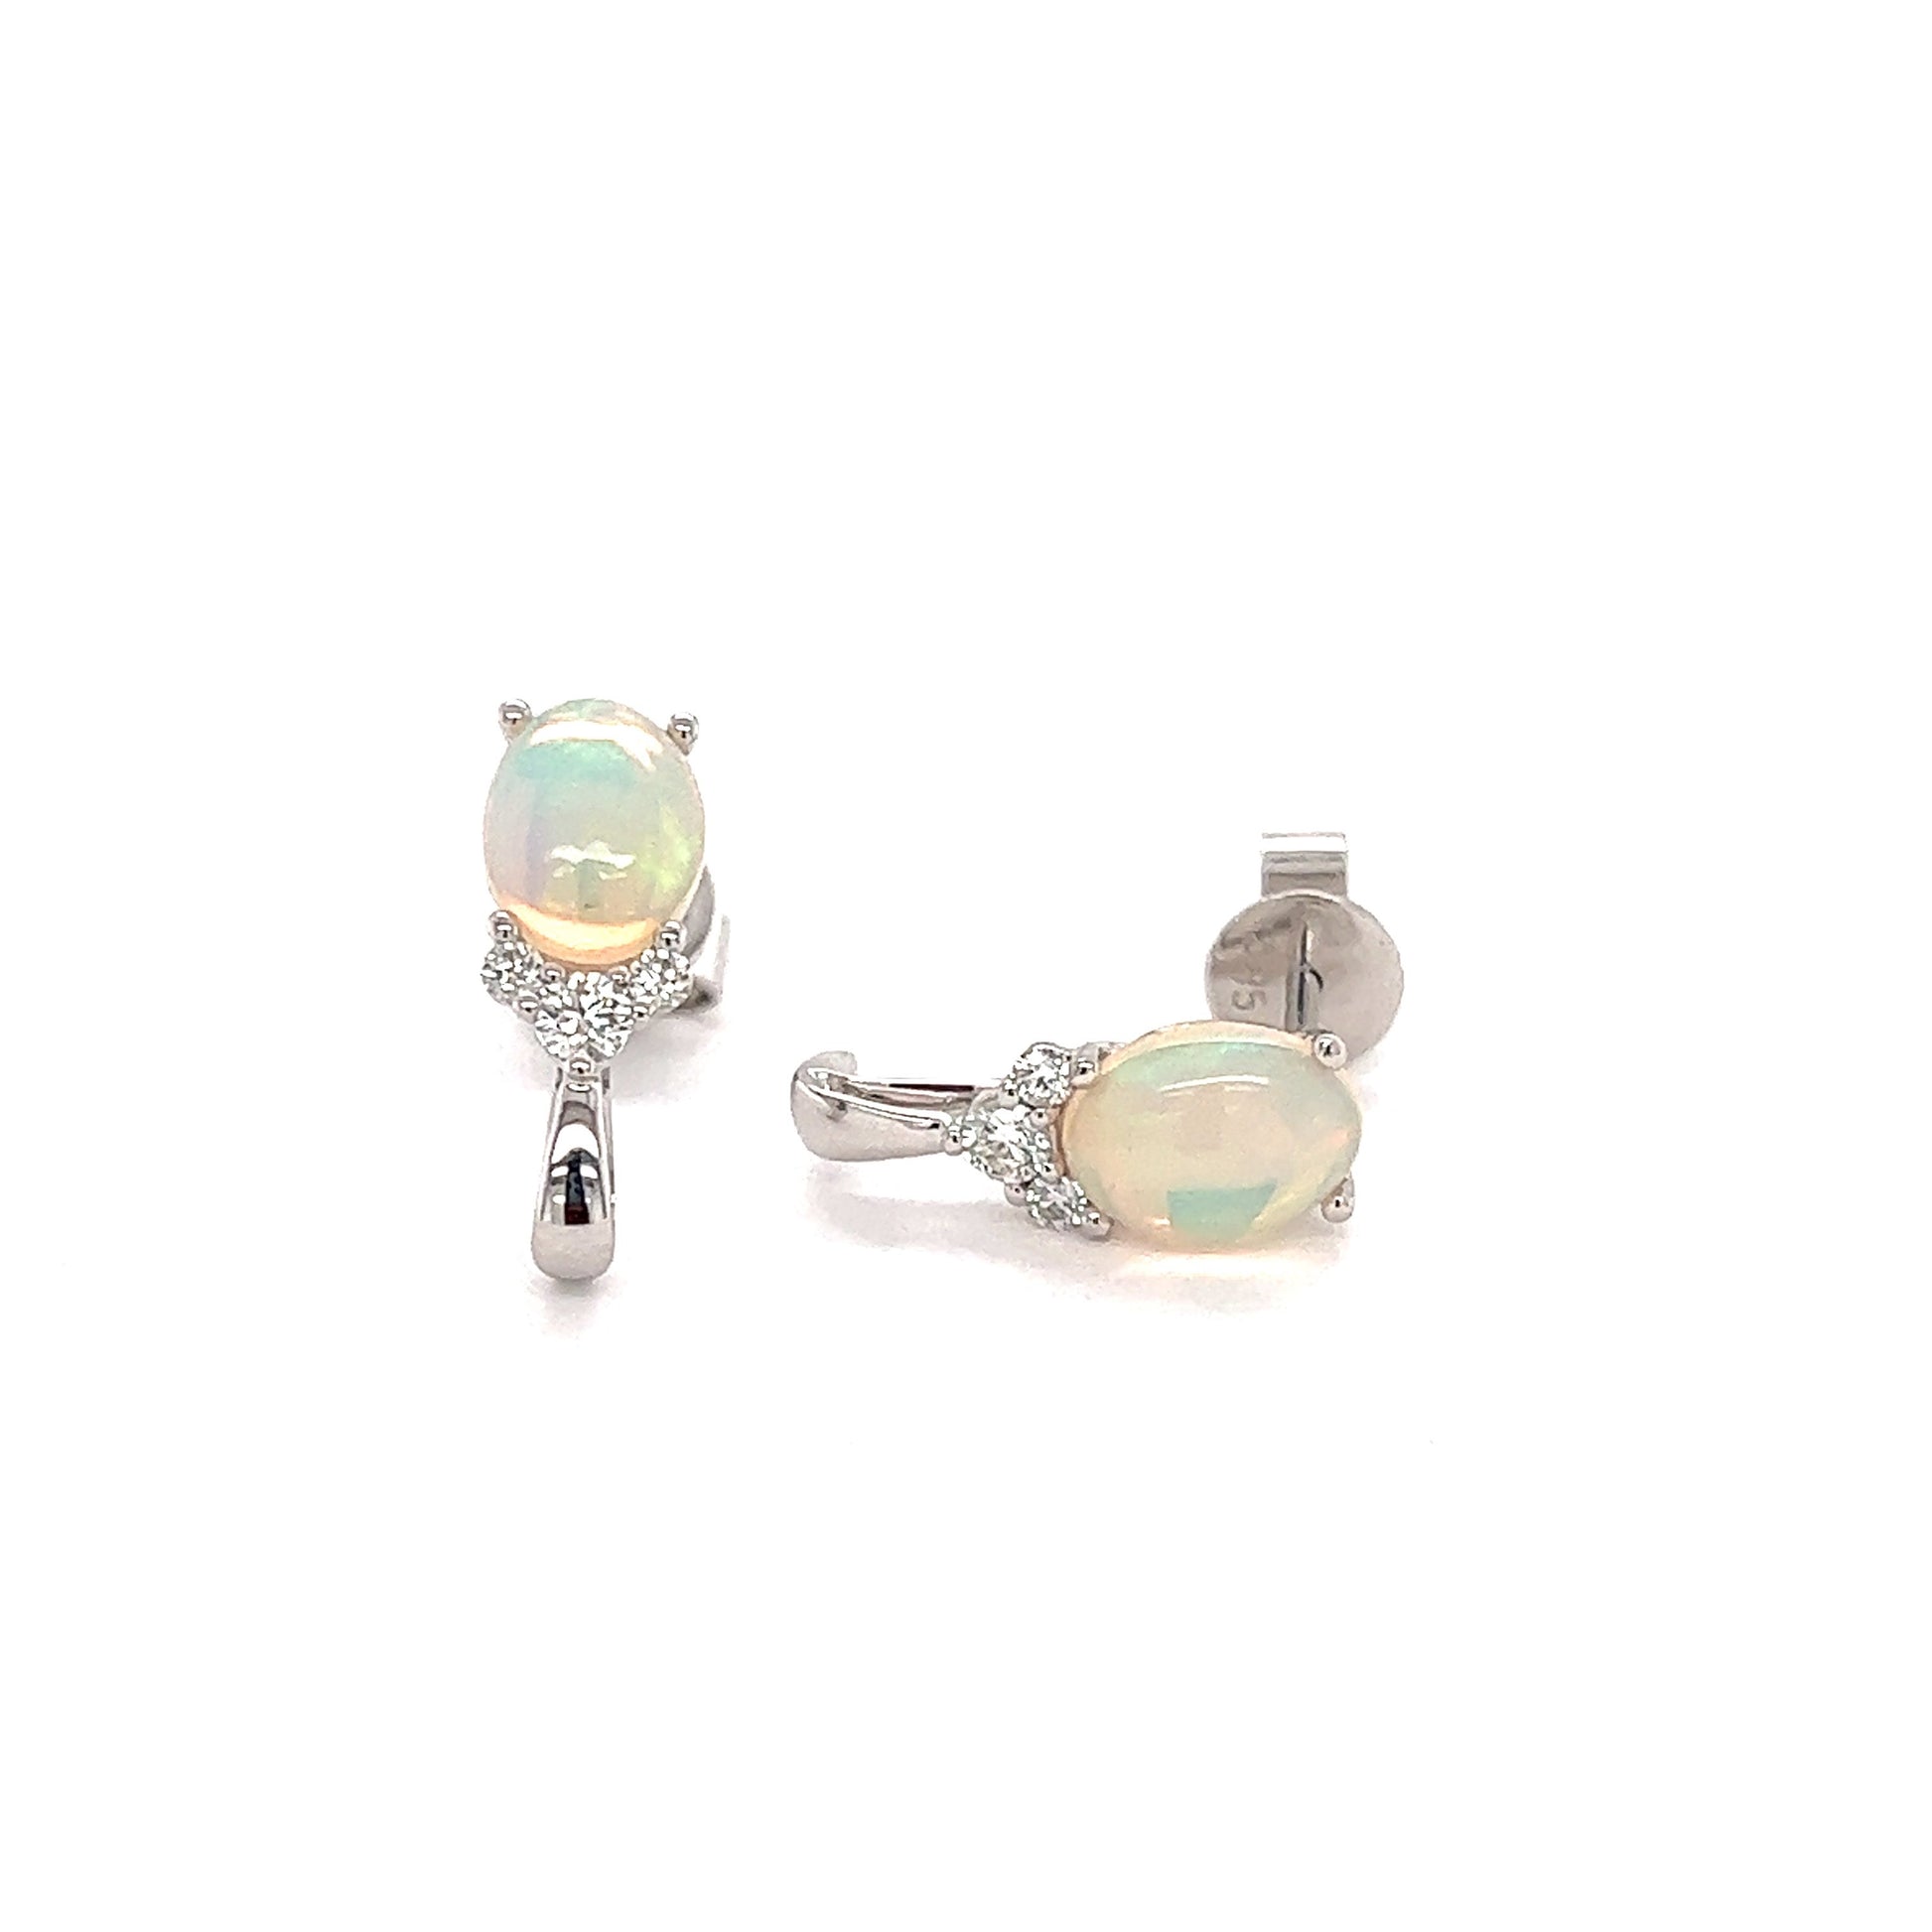 White Ethiopian Opal Stud Earrings with Accent Diamonds in 14K White Gold Front and Flat Front View